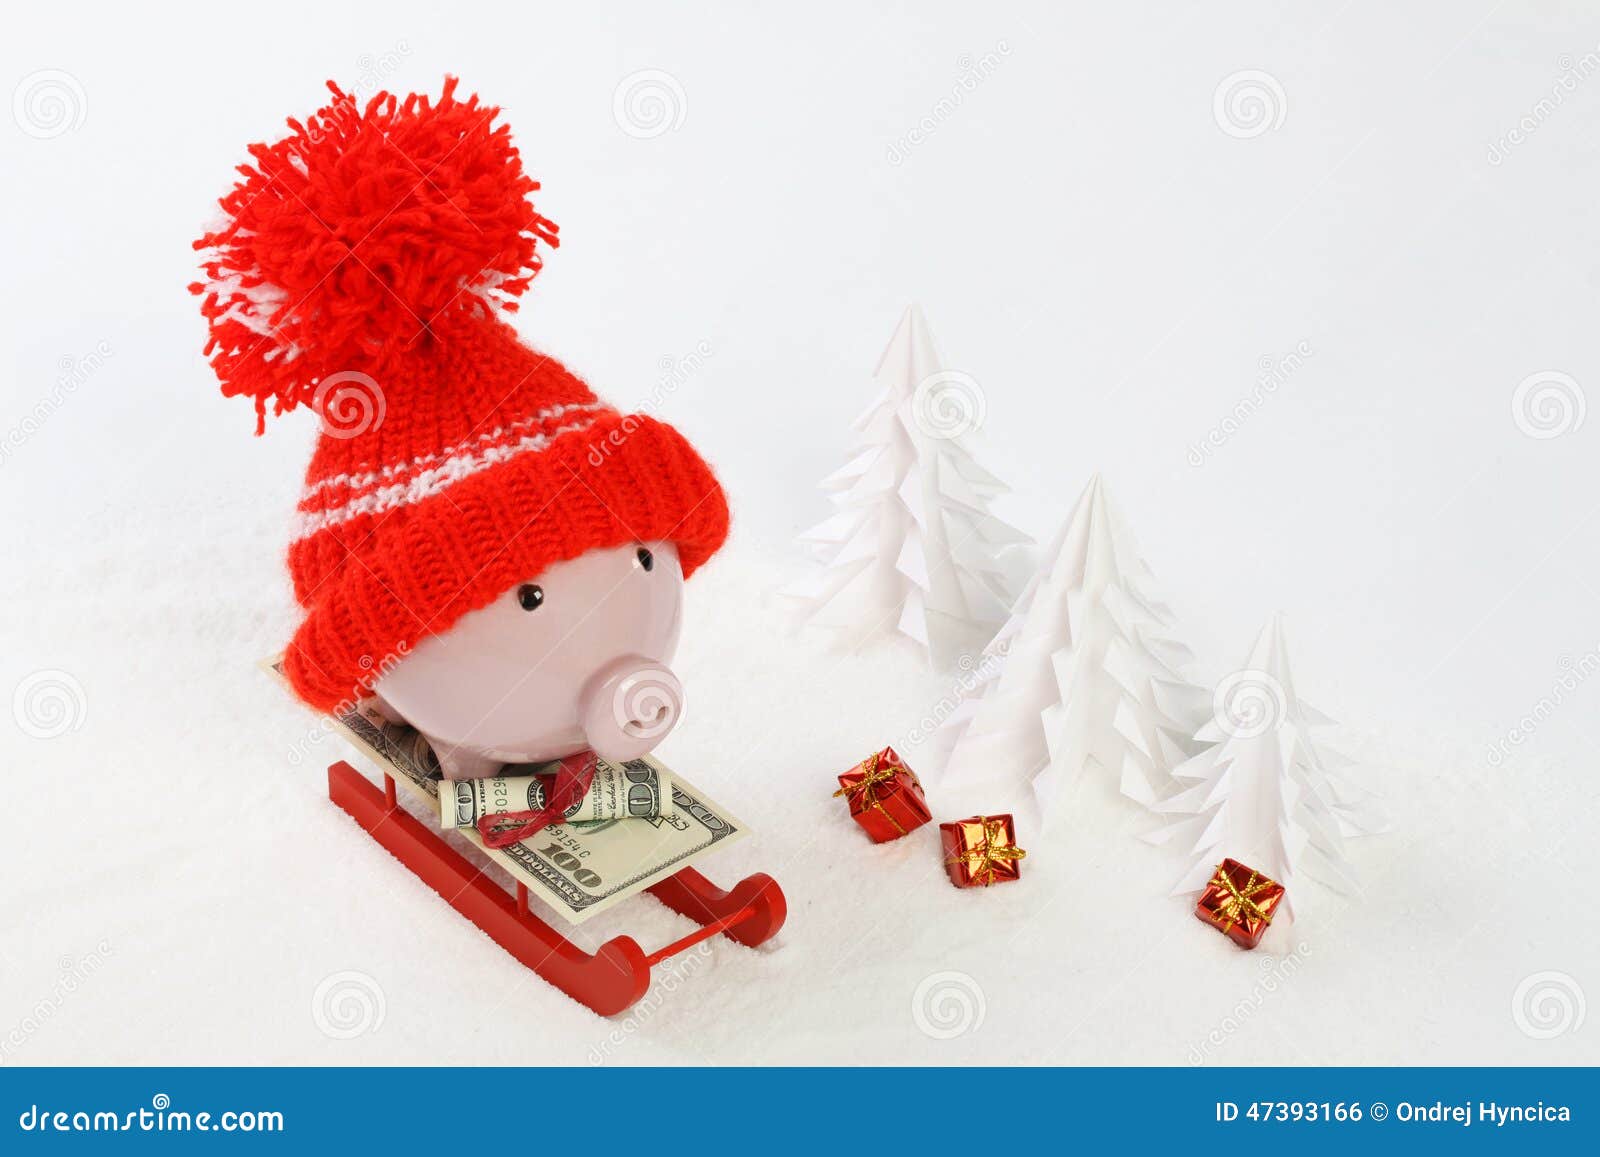 piggy box with red hat with pompom standing on red sled with blanket from greenback hunderd dollars on snow and around are